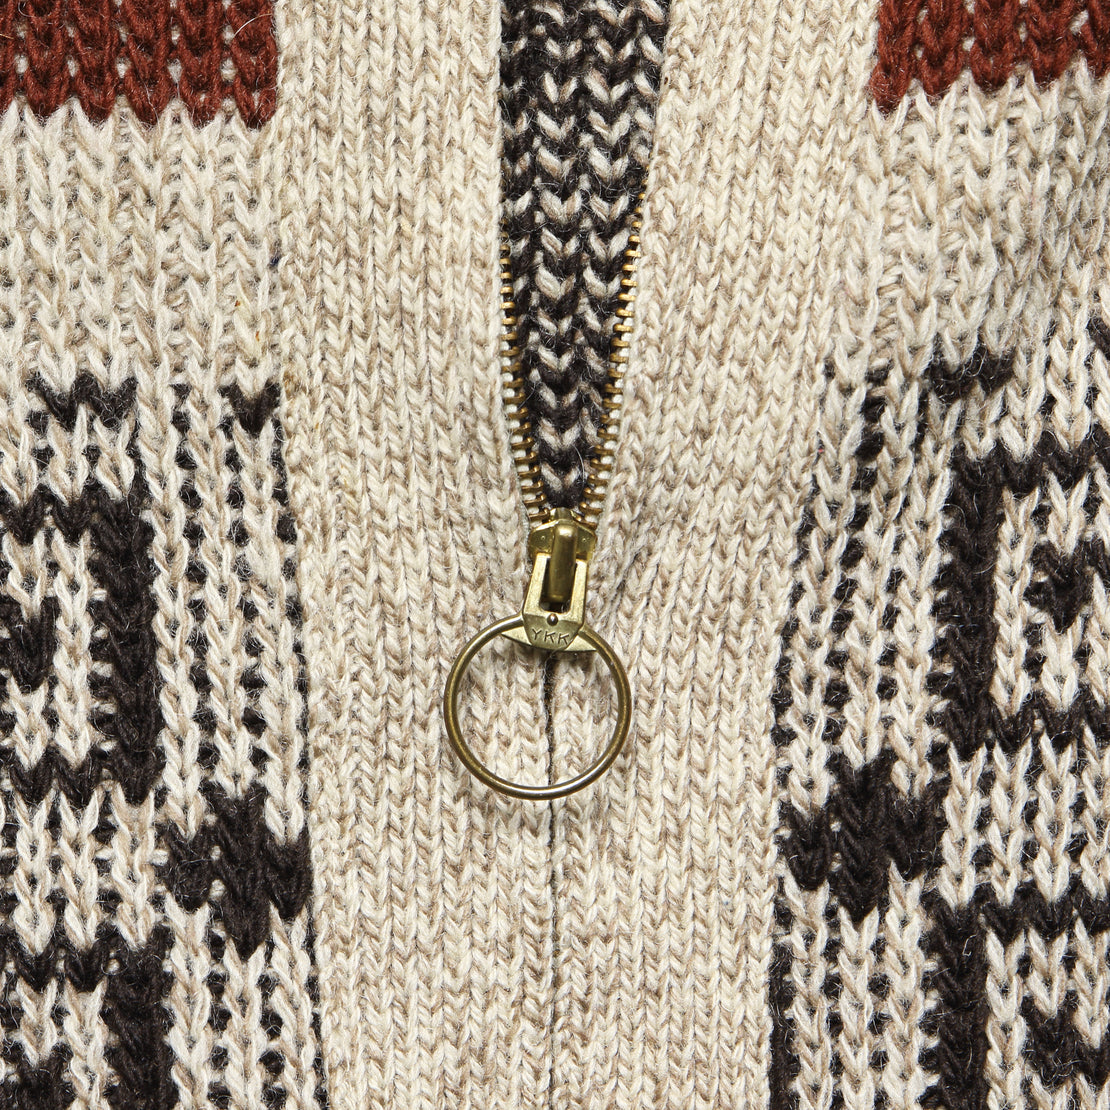 Pendleton Zip Up Sweater - Cream - Vintage - STAG Provisions - One & Done - Apparel